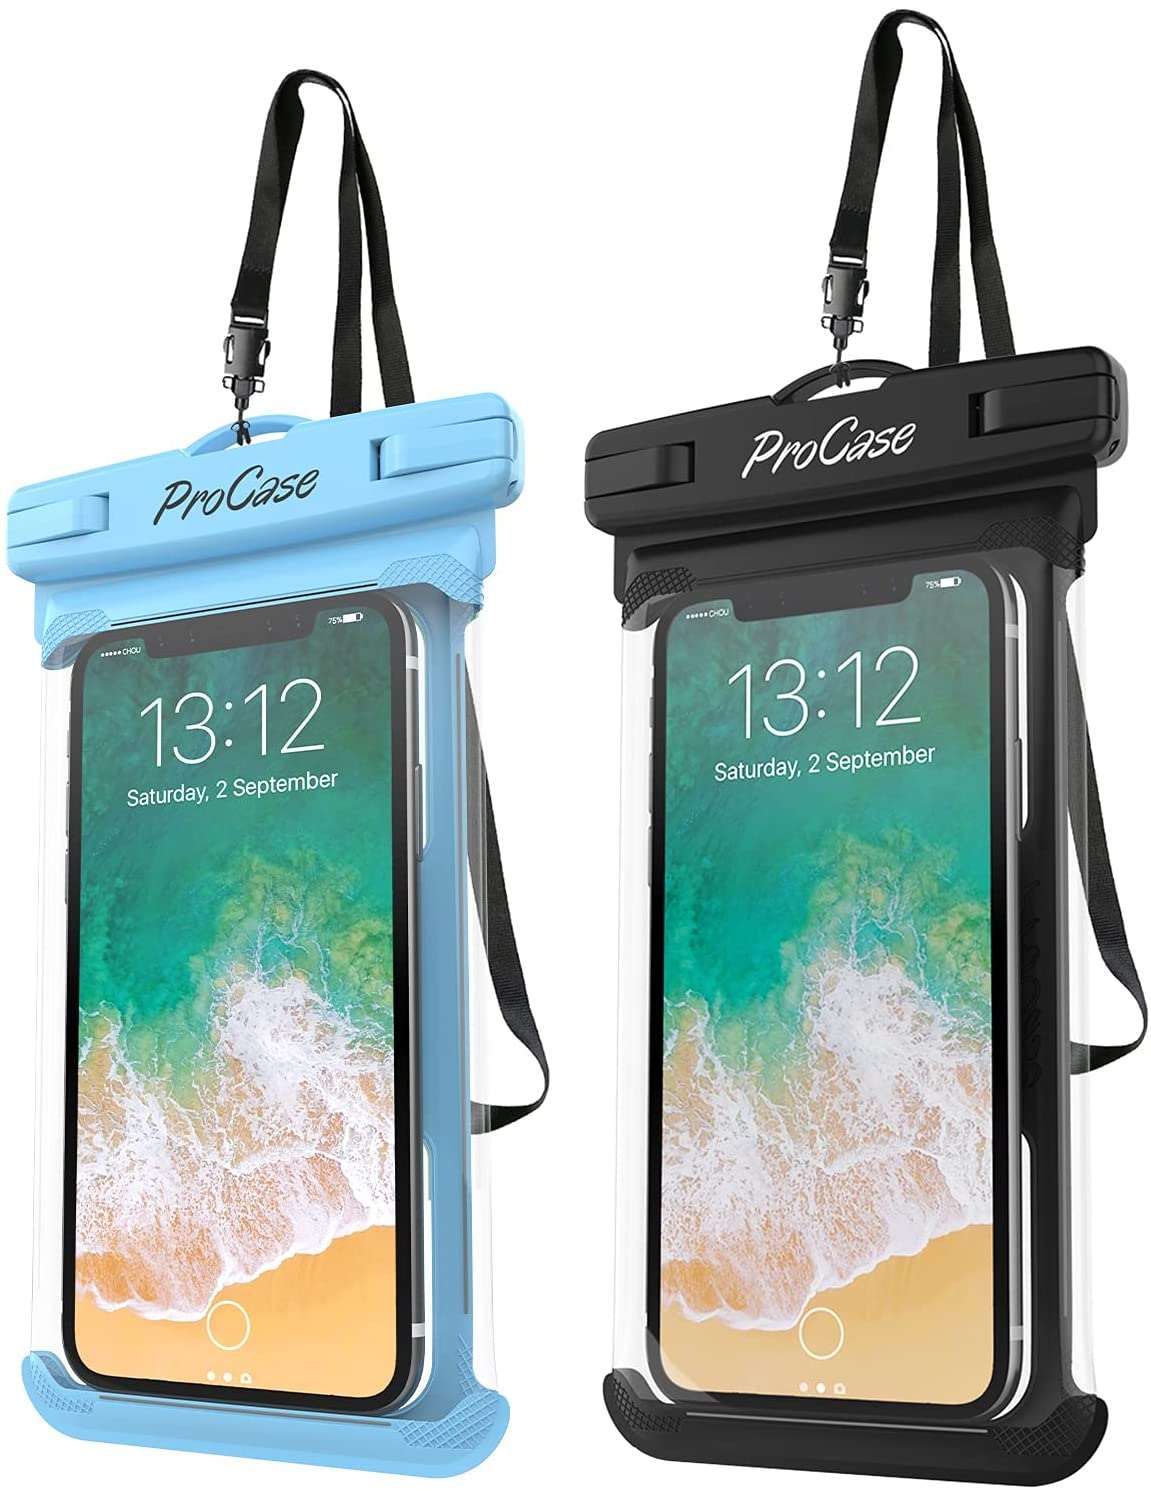 Universal Waterproof Pouch Phone Dry Bag - 2 Pack | ProCase blue+blakc